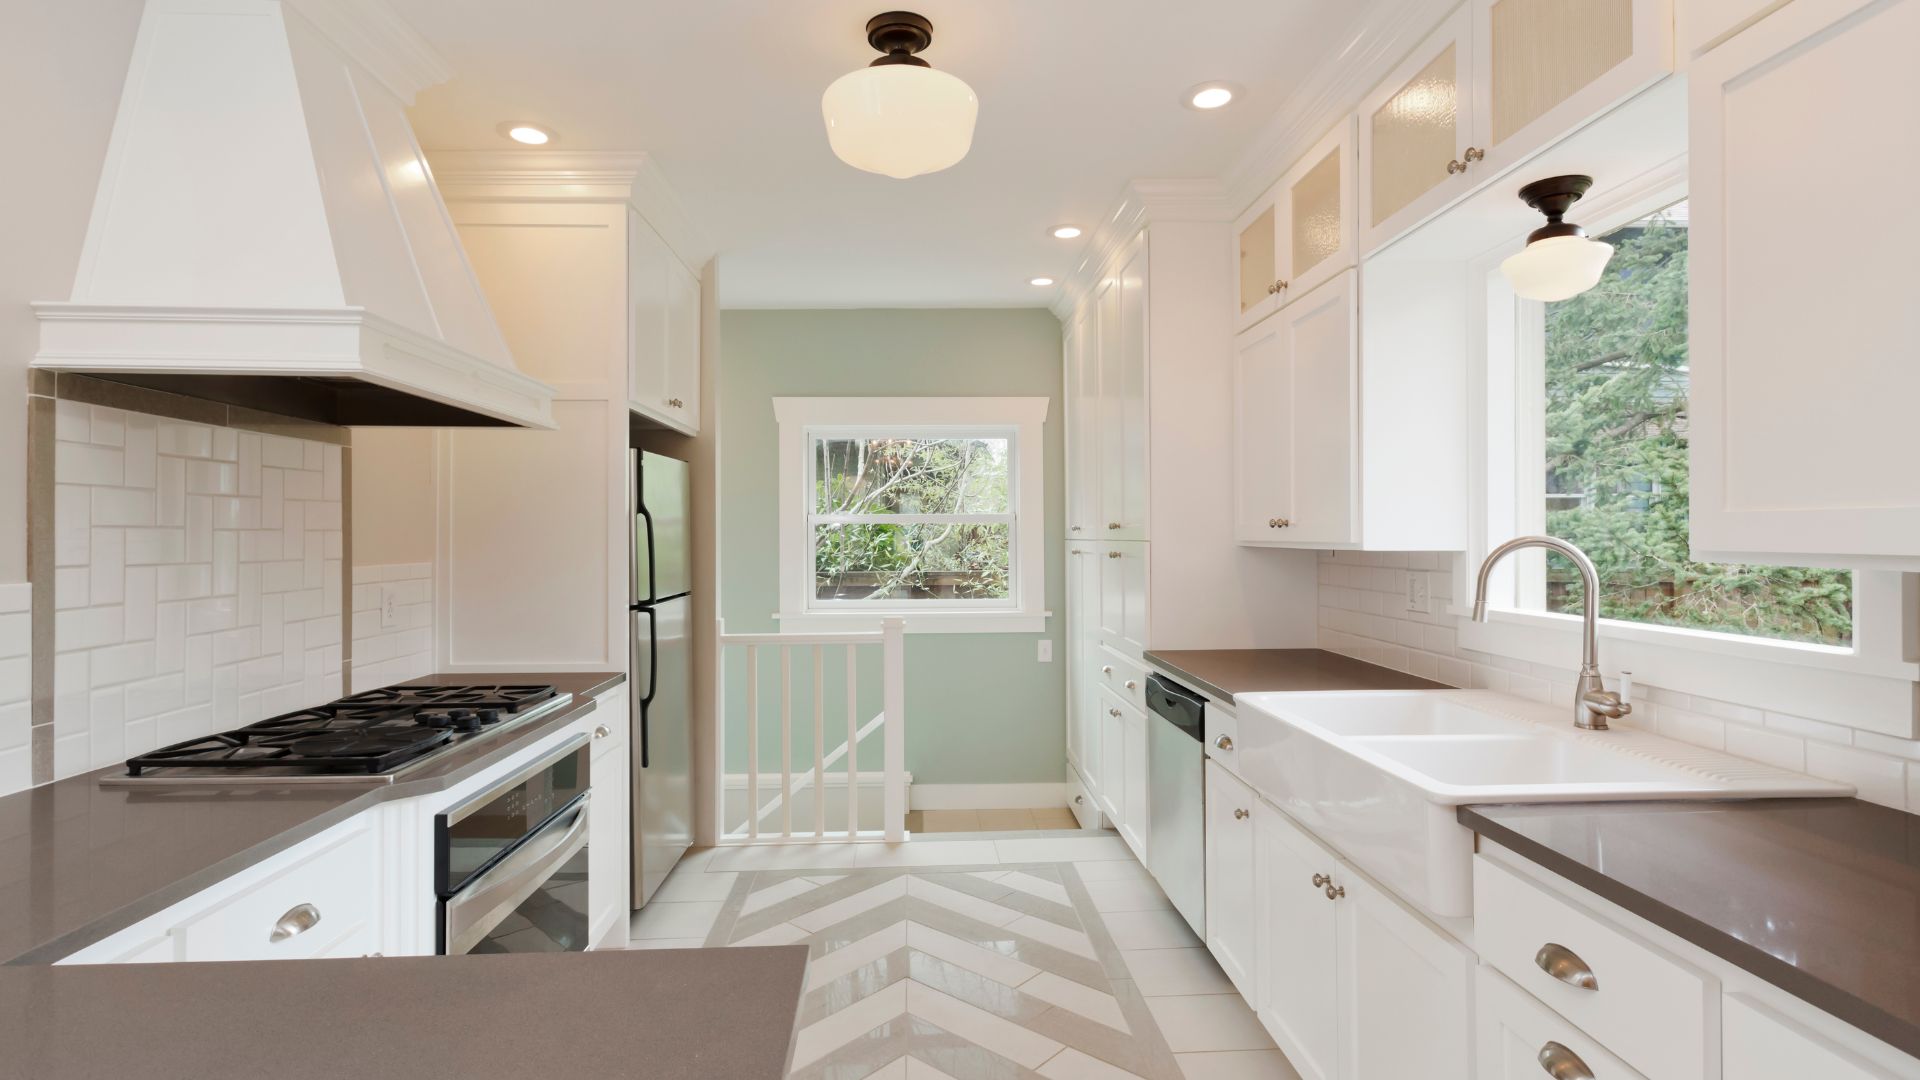 A galley kitchen with white cabinets and stainless steel appliances.